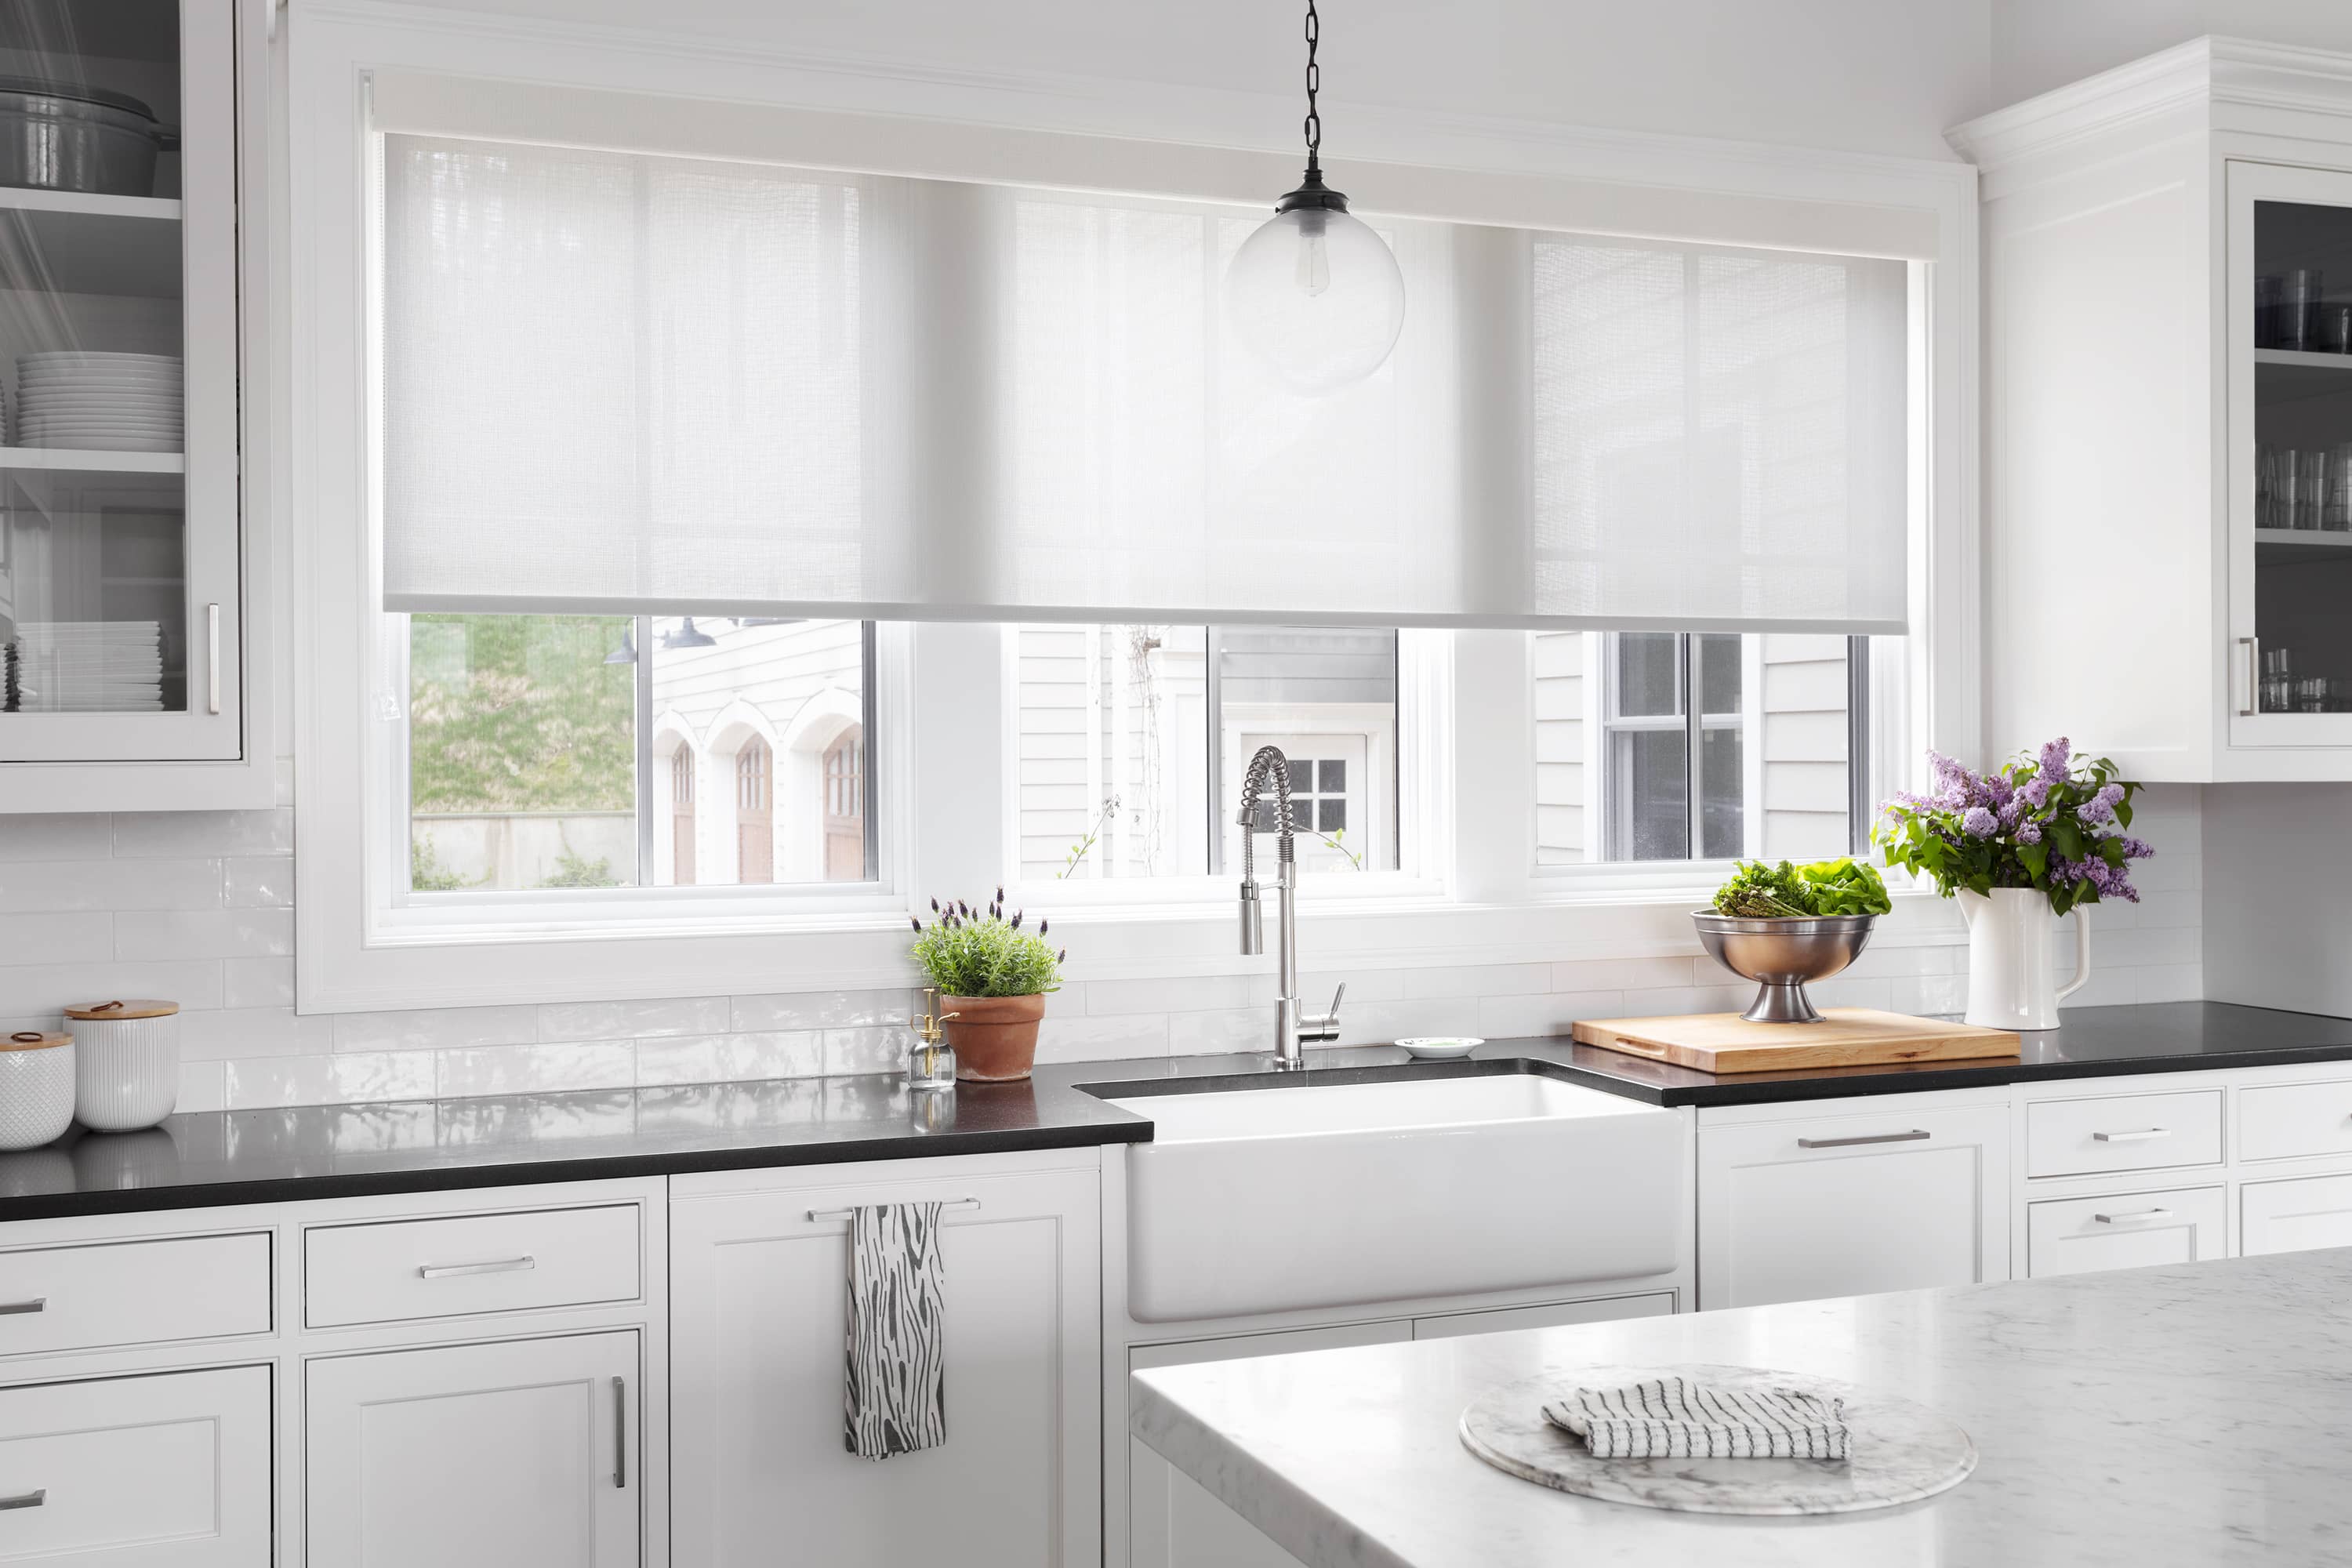 A white, cordless roller shades with 10% openness covers three large windows above a kitchen sink.